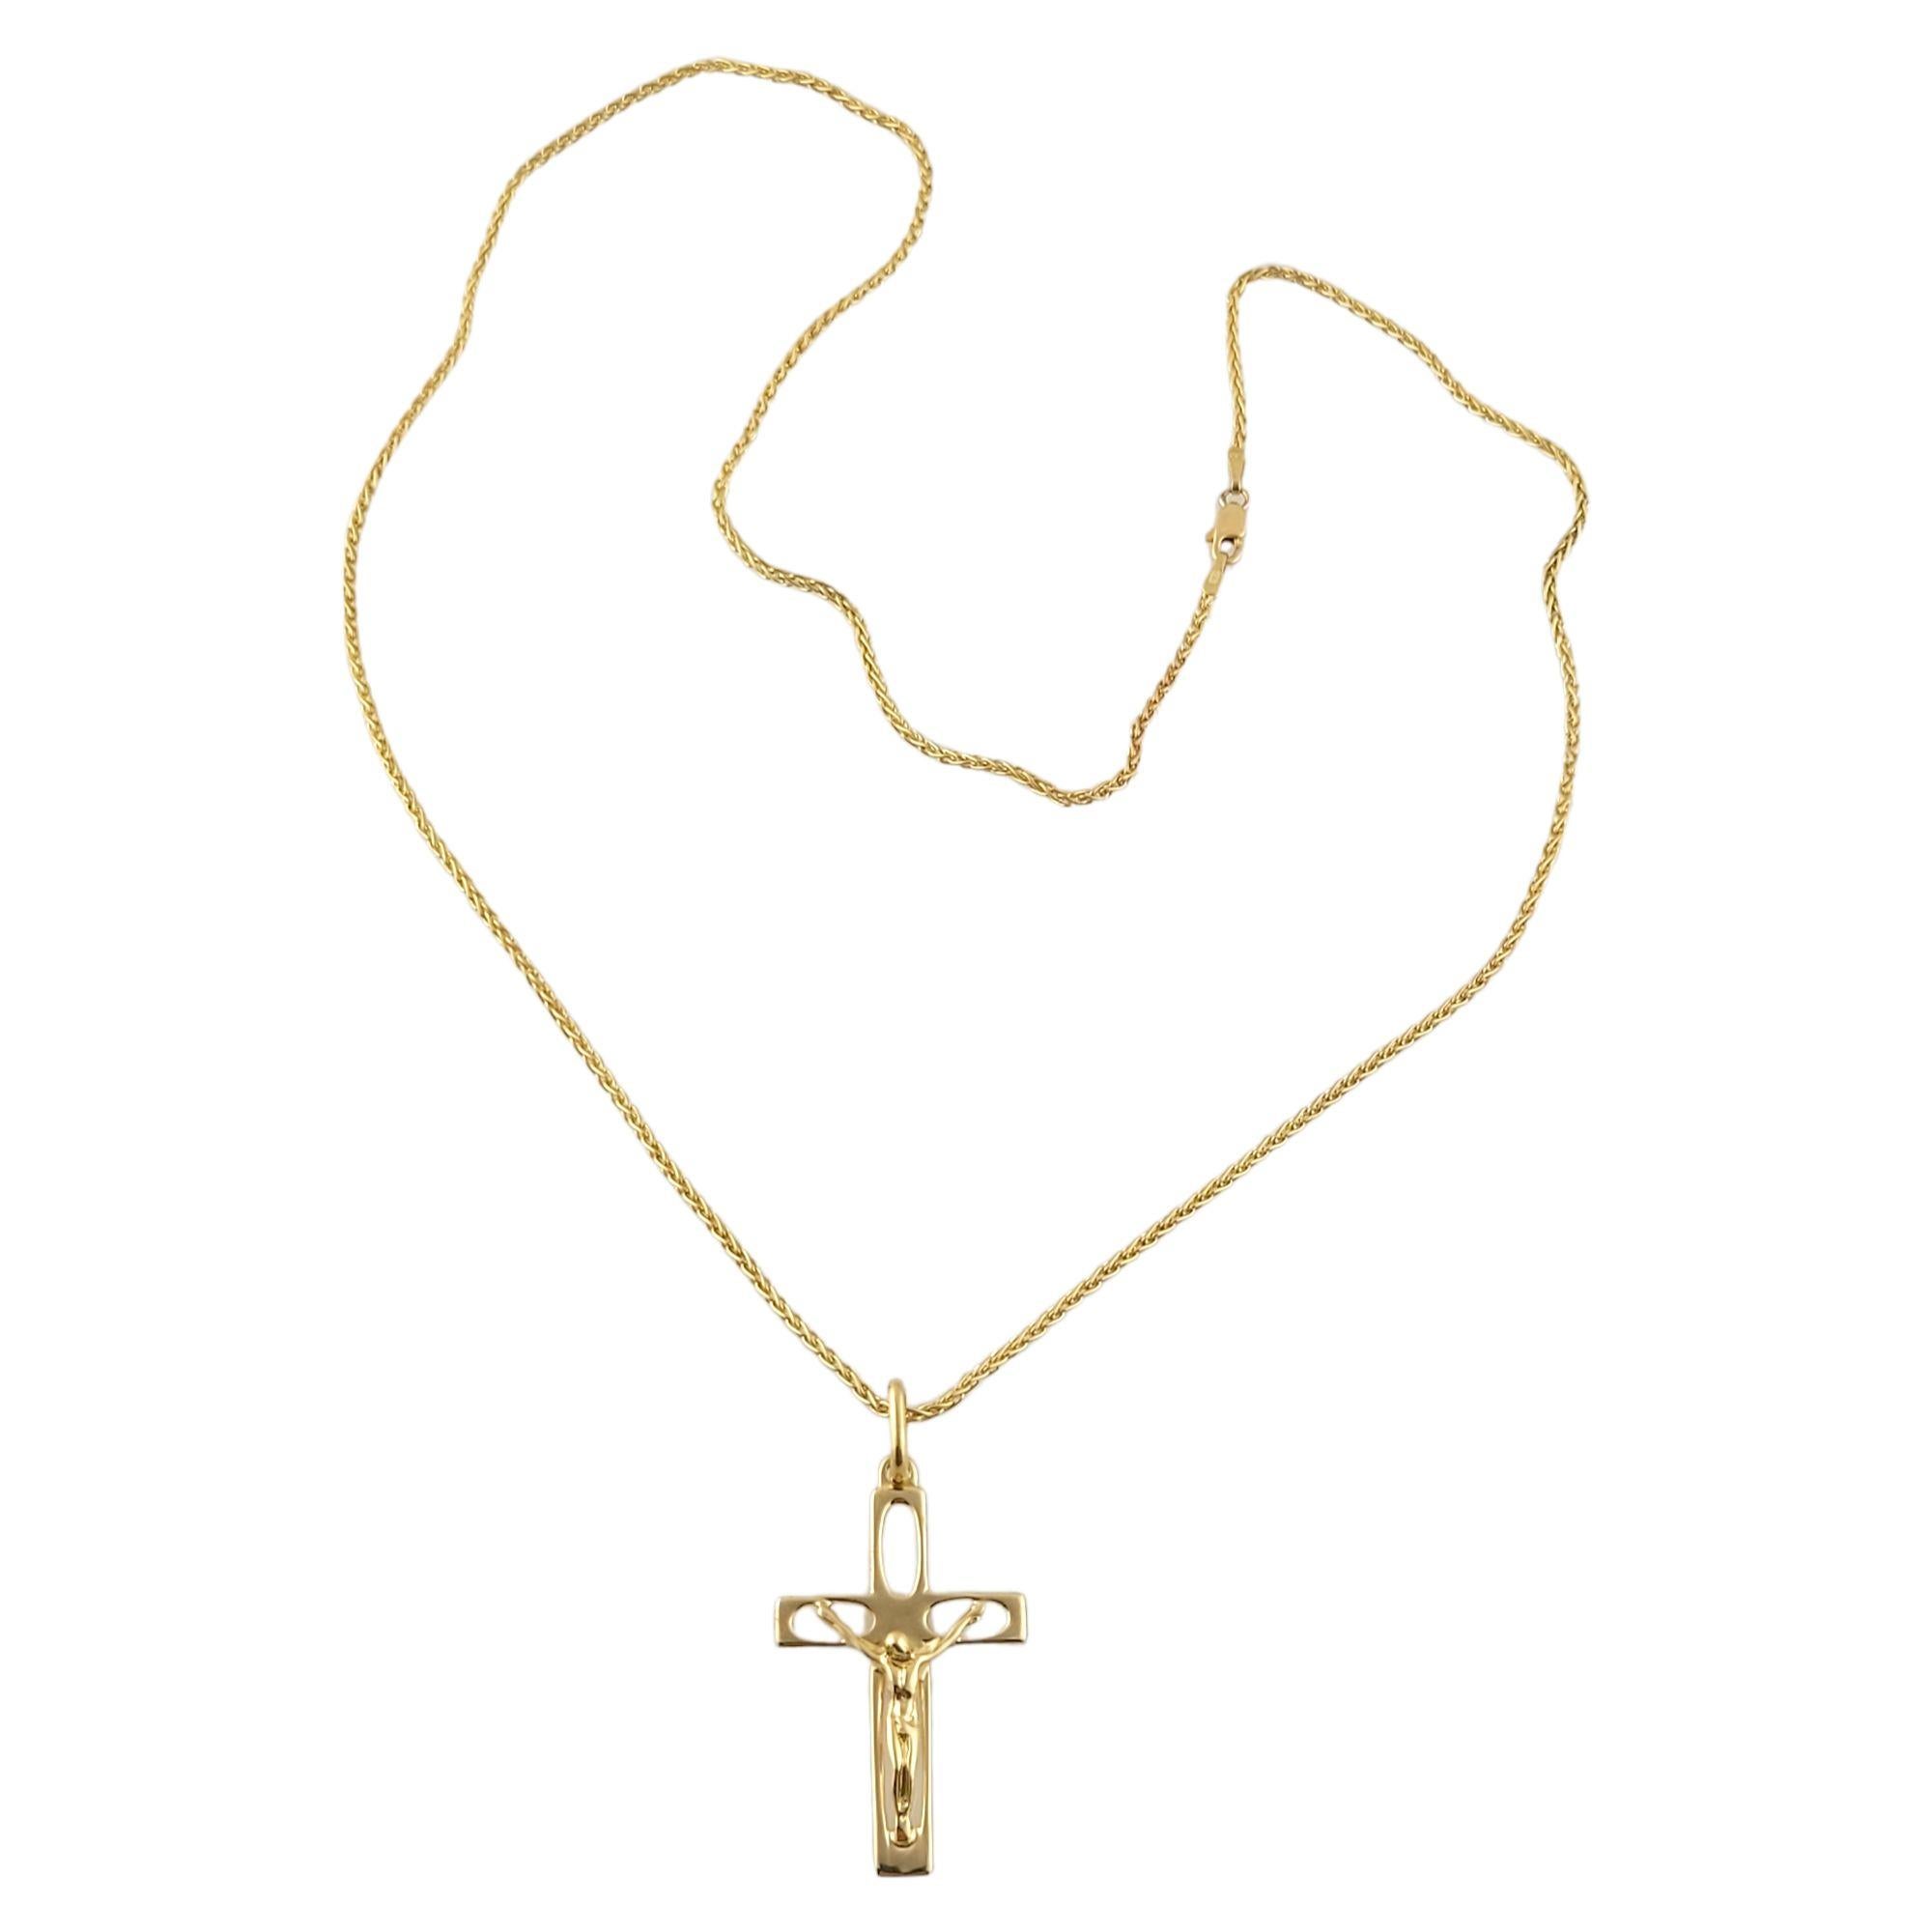 Vintage 14K Yellow Gold Cross Pendant Necklace

This gorgeous yellow gold chain is paired with a beautiful 14K gold cross pendant!

Chain length: 24.25